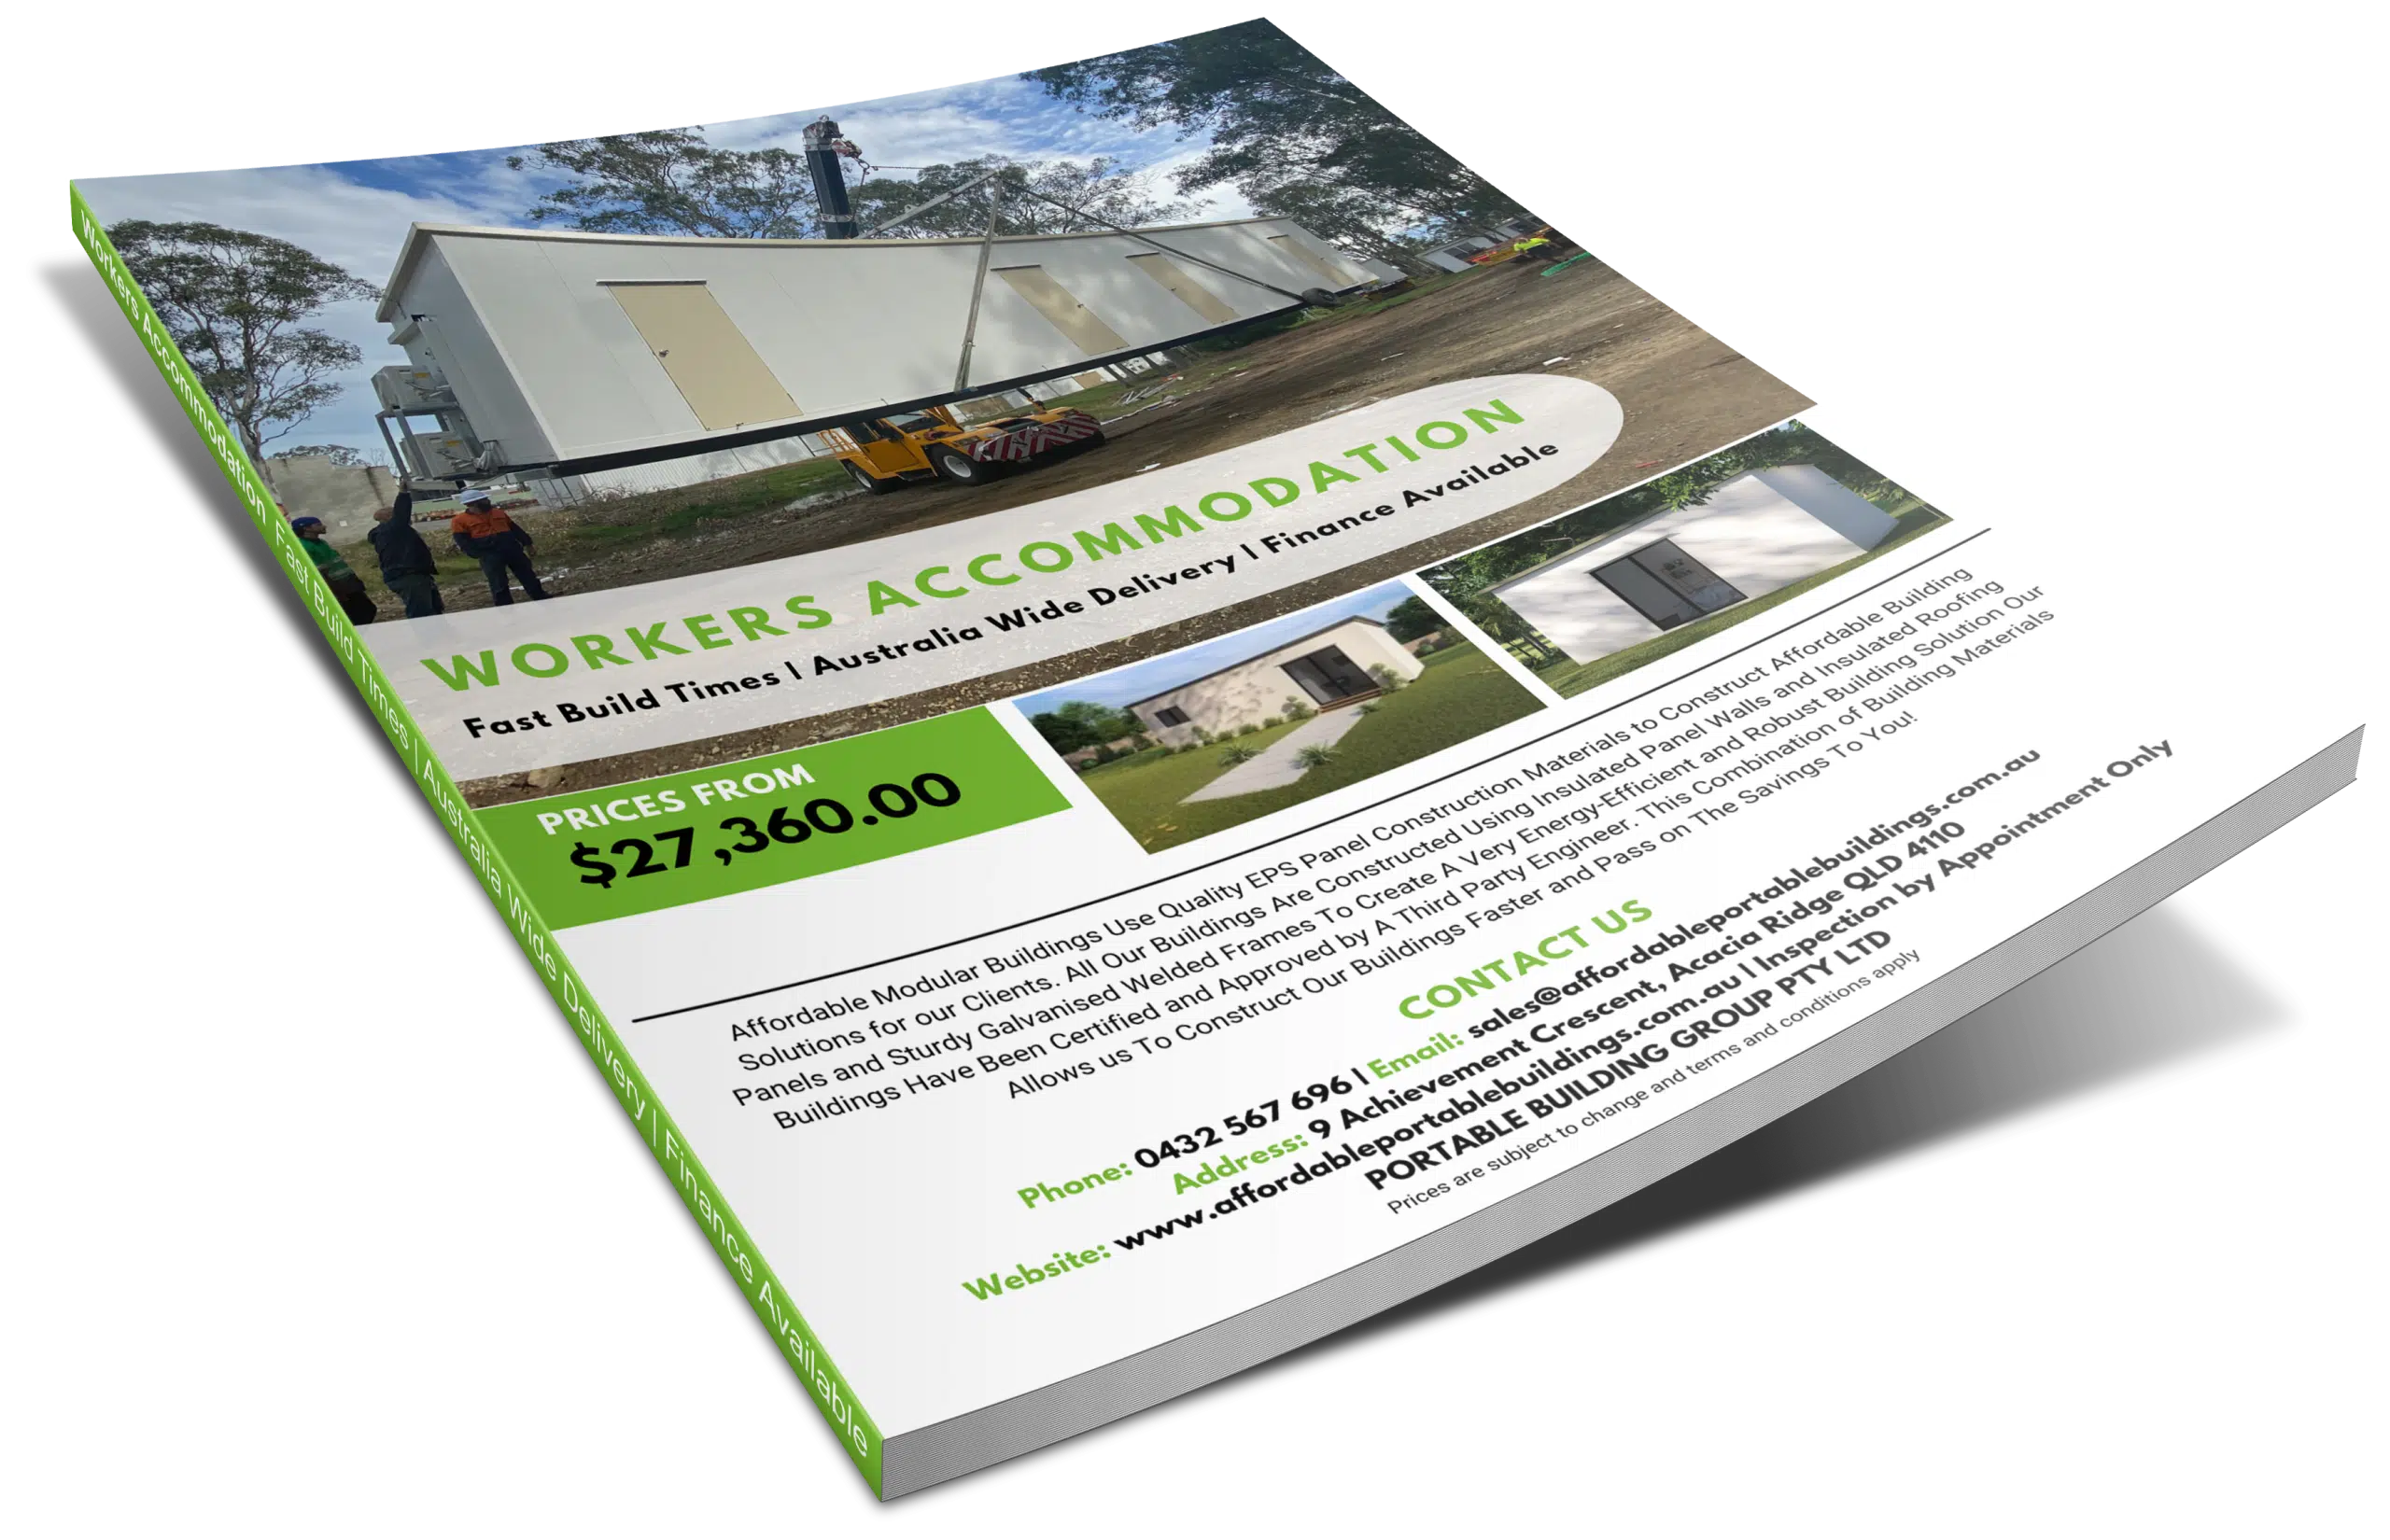 Workers Accommodation ebook